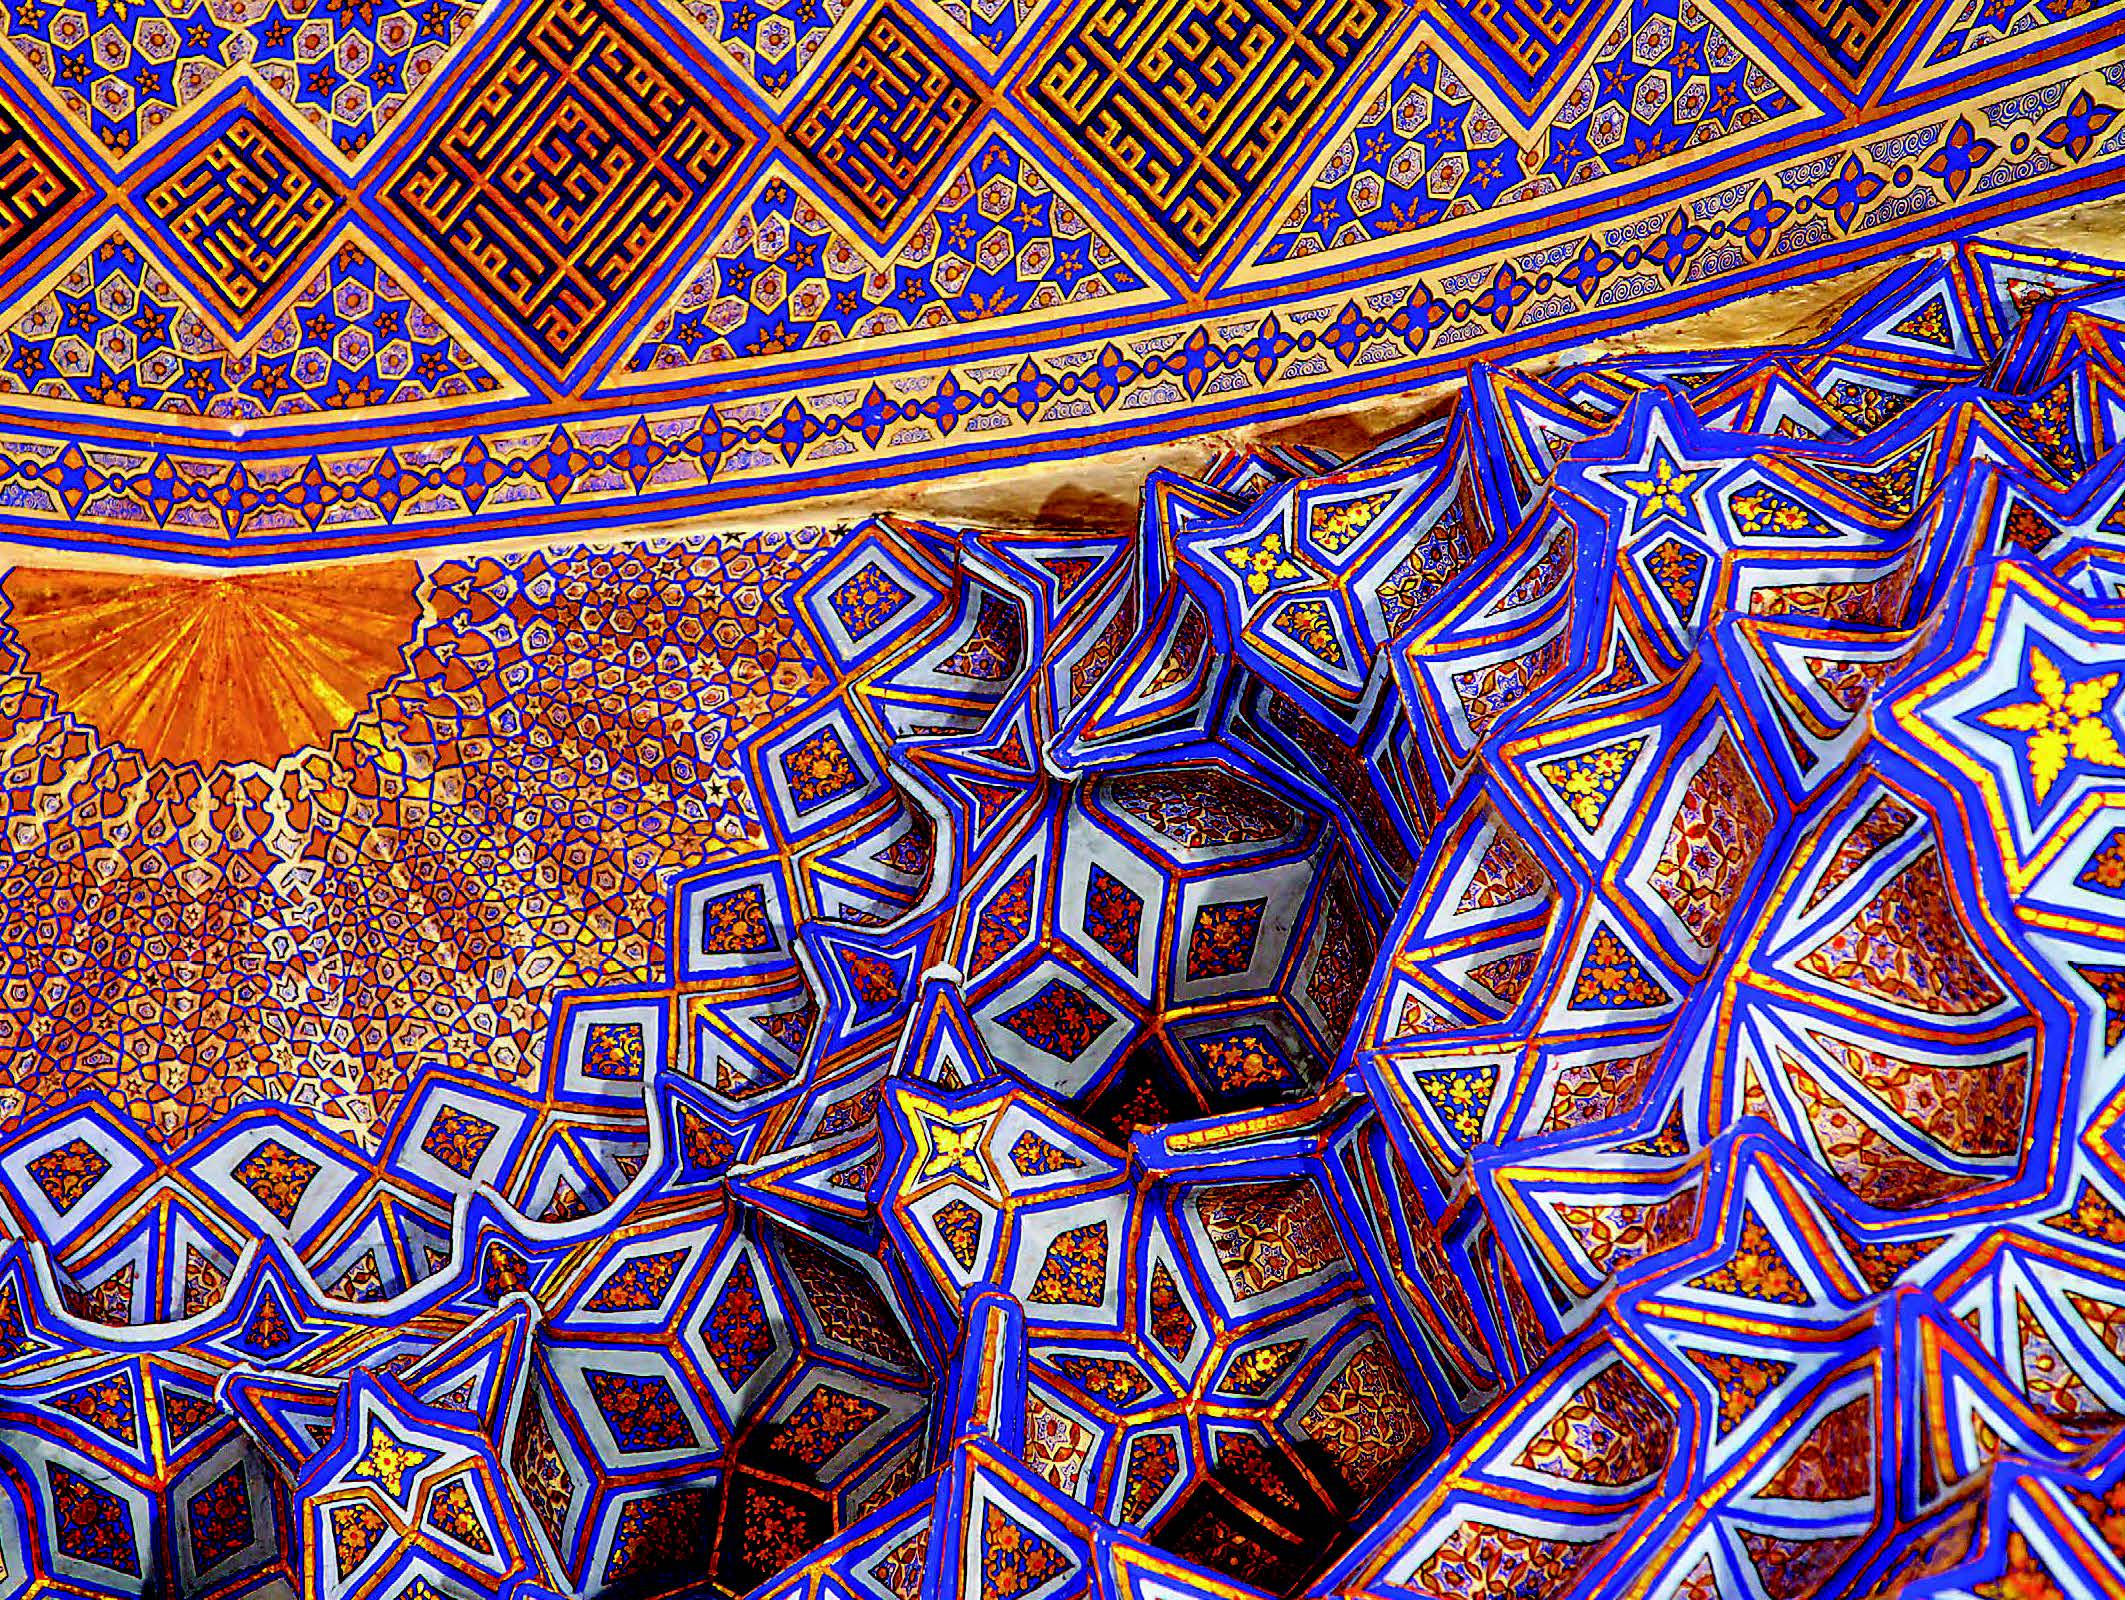 SAMARKAND, UZBEKISTAN: GUR-I-MIR Built as a madrasa in the late 1300s CE, this complex became the burial site of Amir Timur and many of his male successors. The interior decoration is brilliant to the point of overwhelming, particularly the muqarnas, which was made of pressed and molded paper painted in blue and gold and fastened to the surfaces with small iron nails. Over time, the paper hung in shreds until recent restoration.